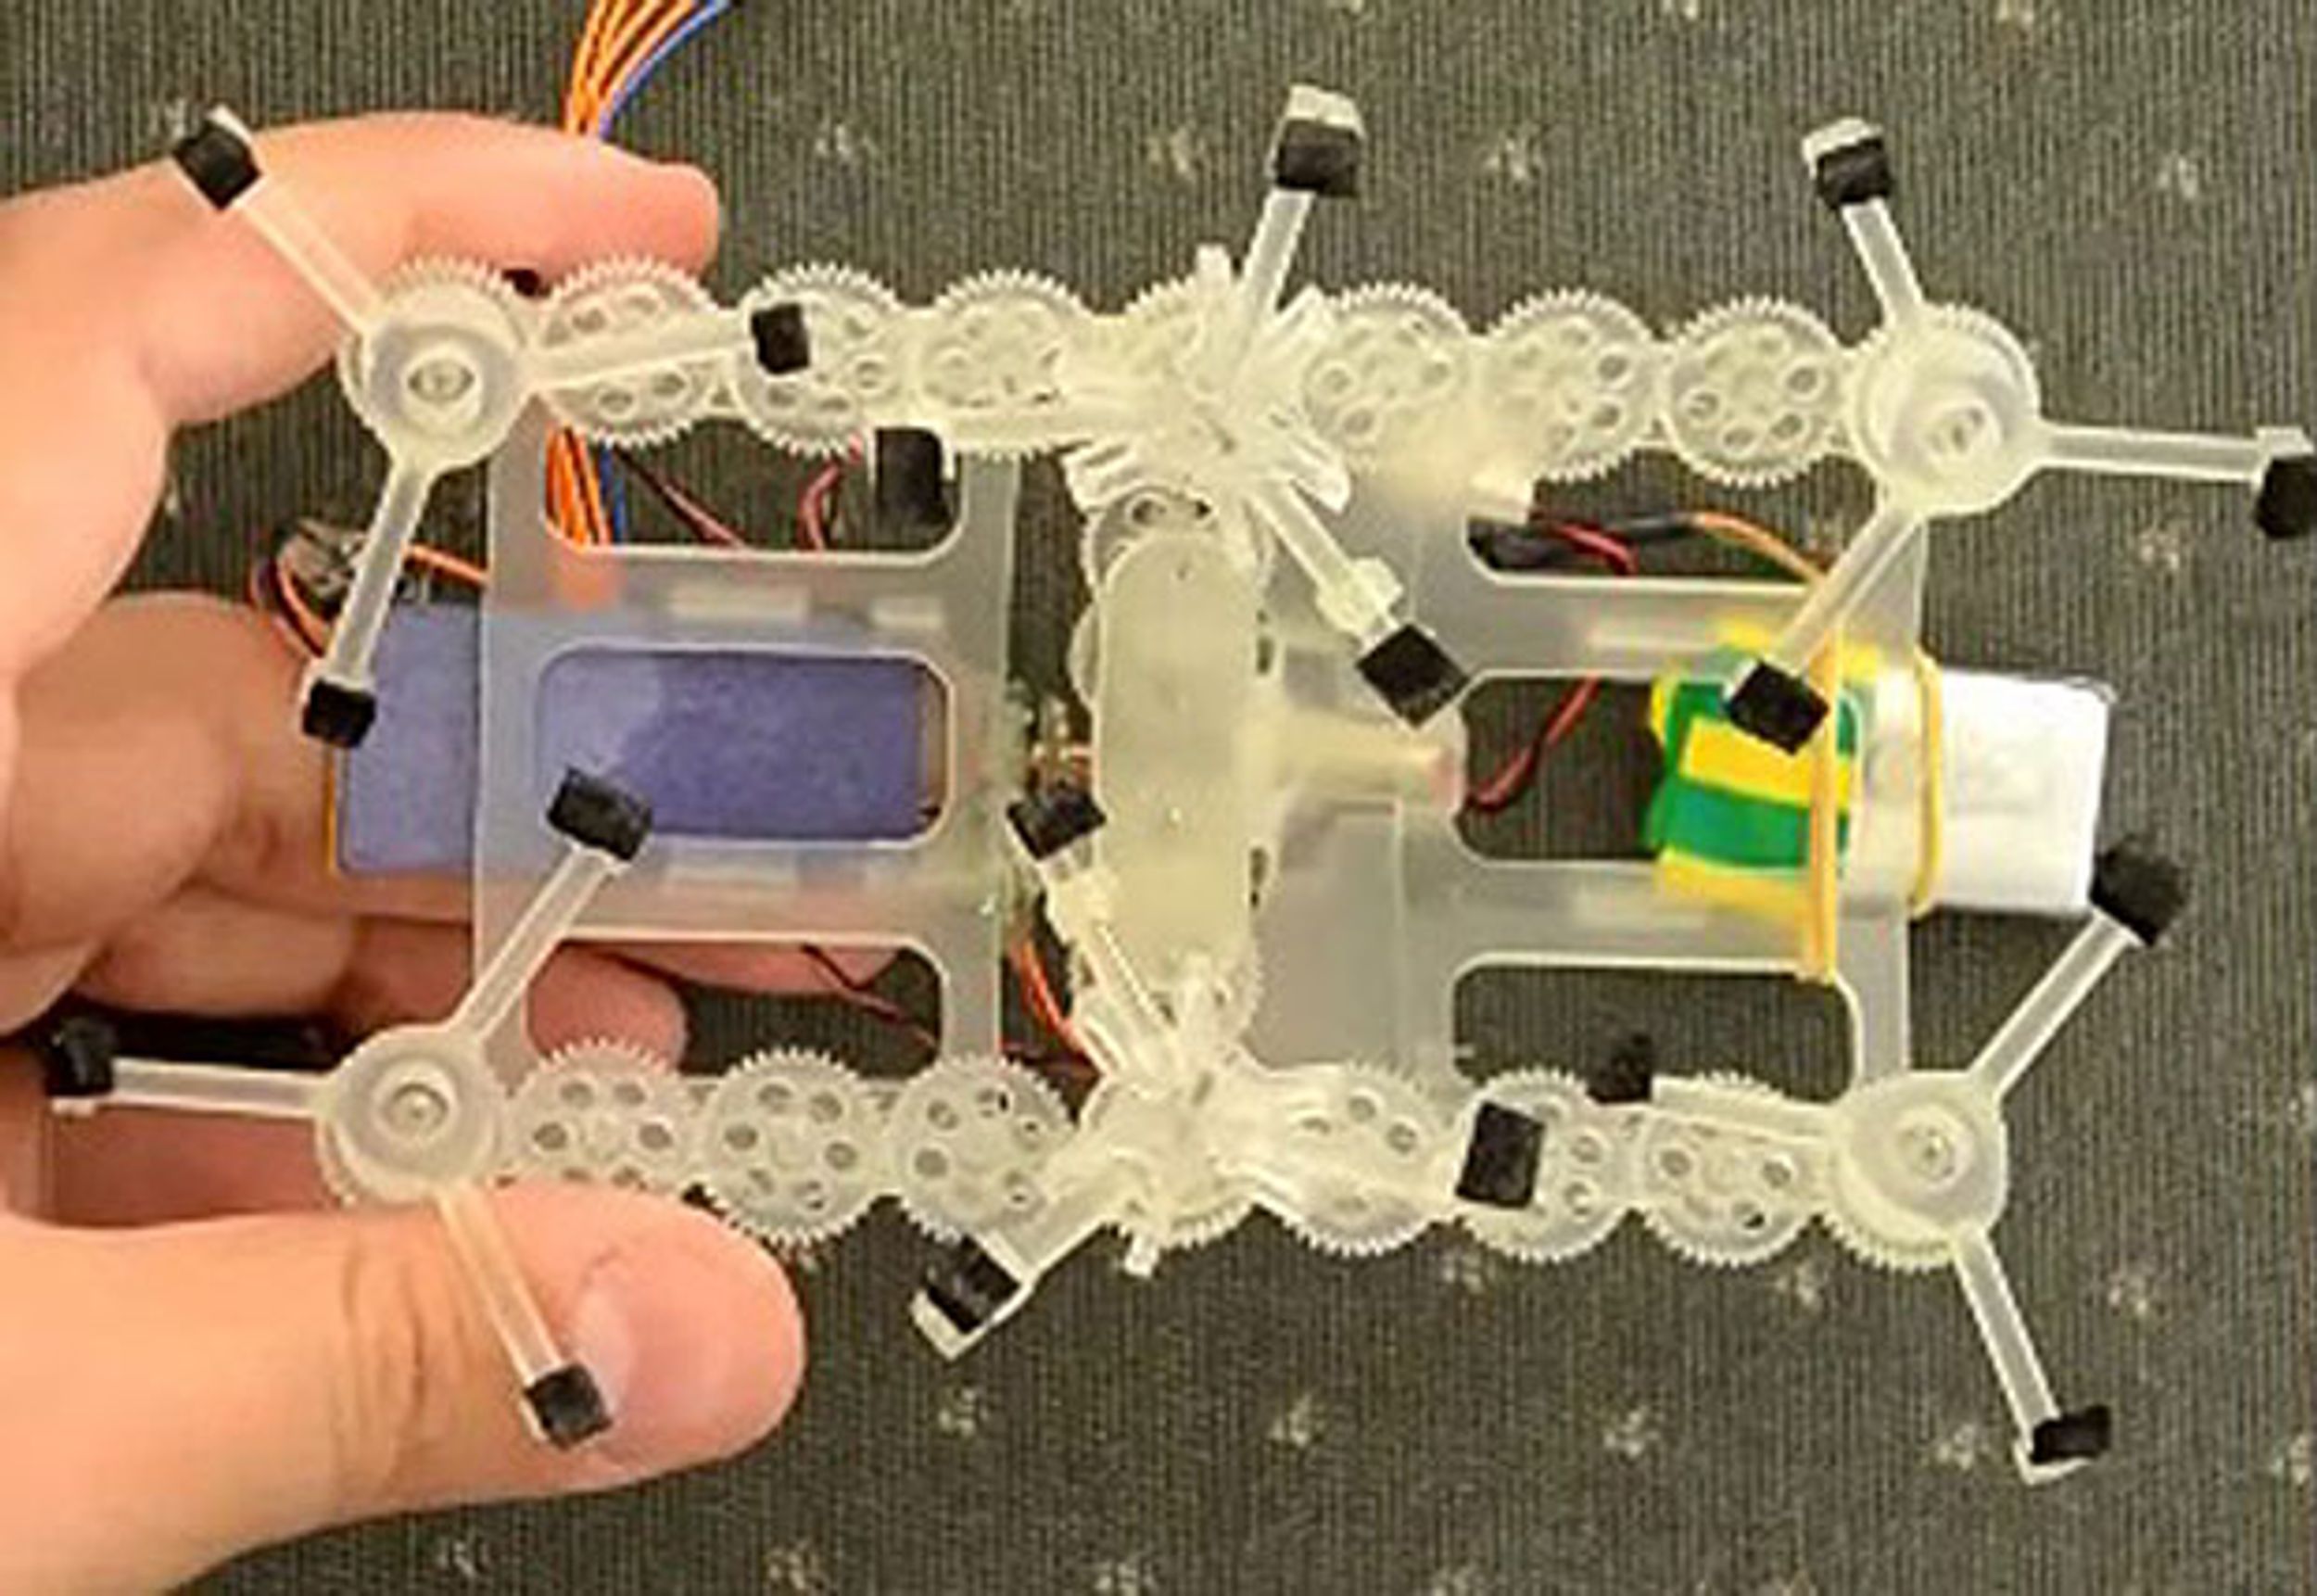 How to Make a Steerable Robot With Just One Single Motor